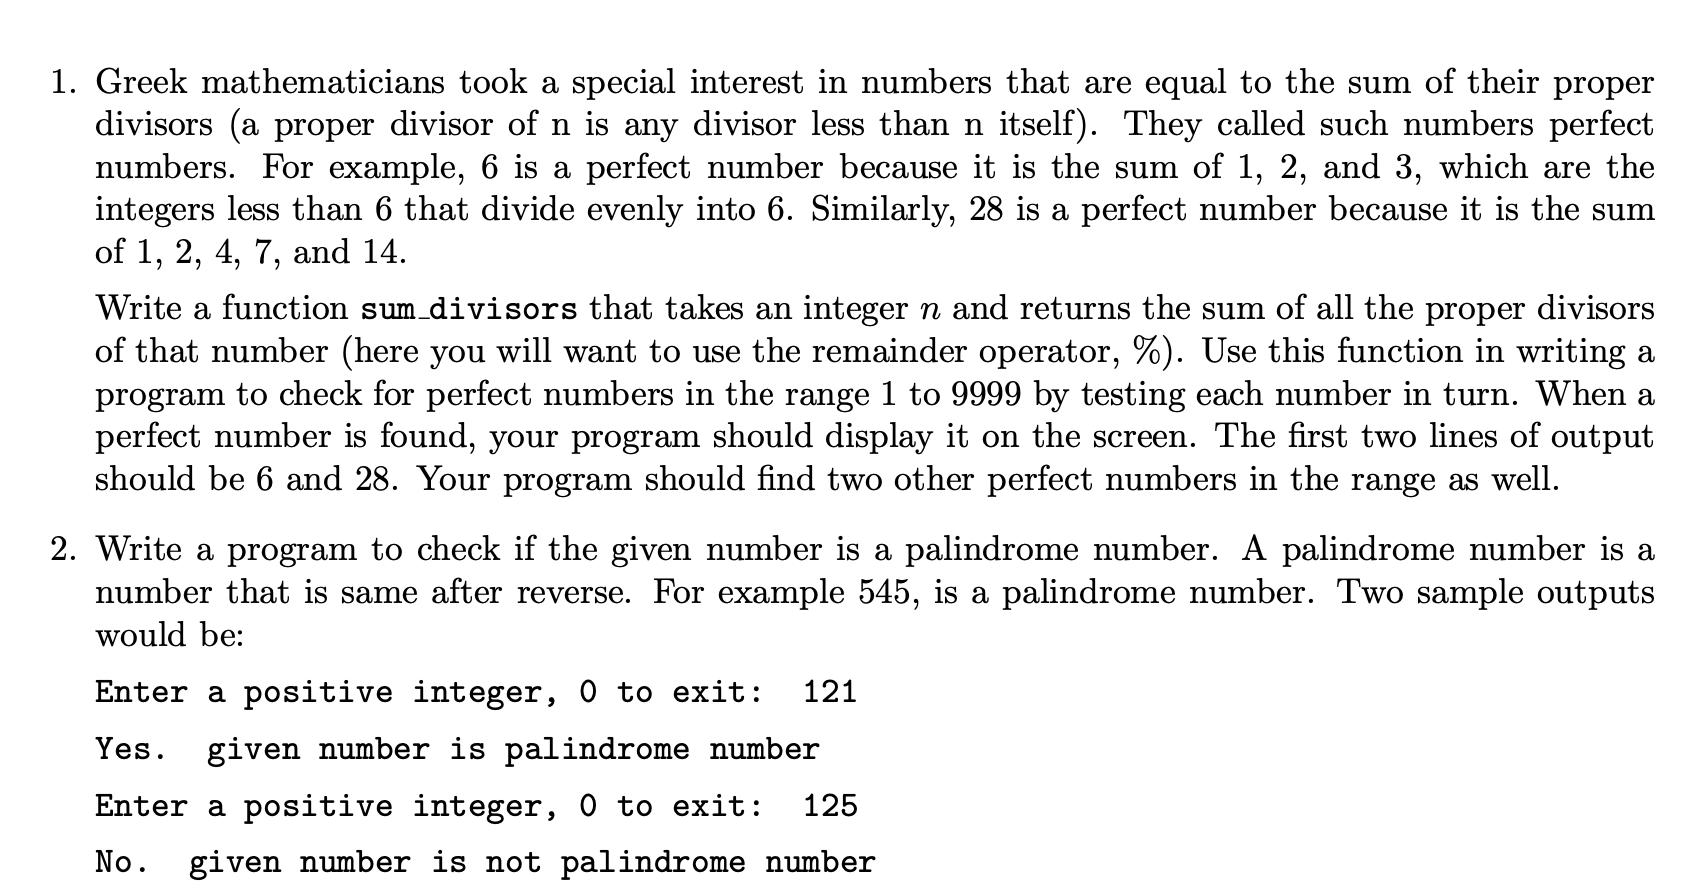 1. Greek mathematicians took a special interest in numbers that are equal to the sum of their proper divisors